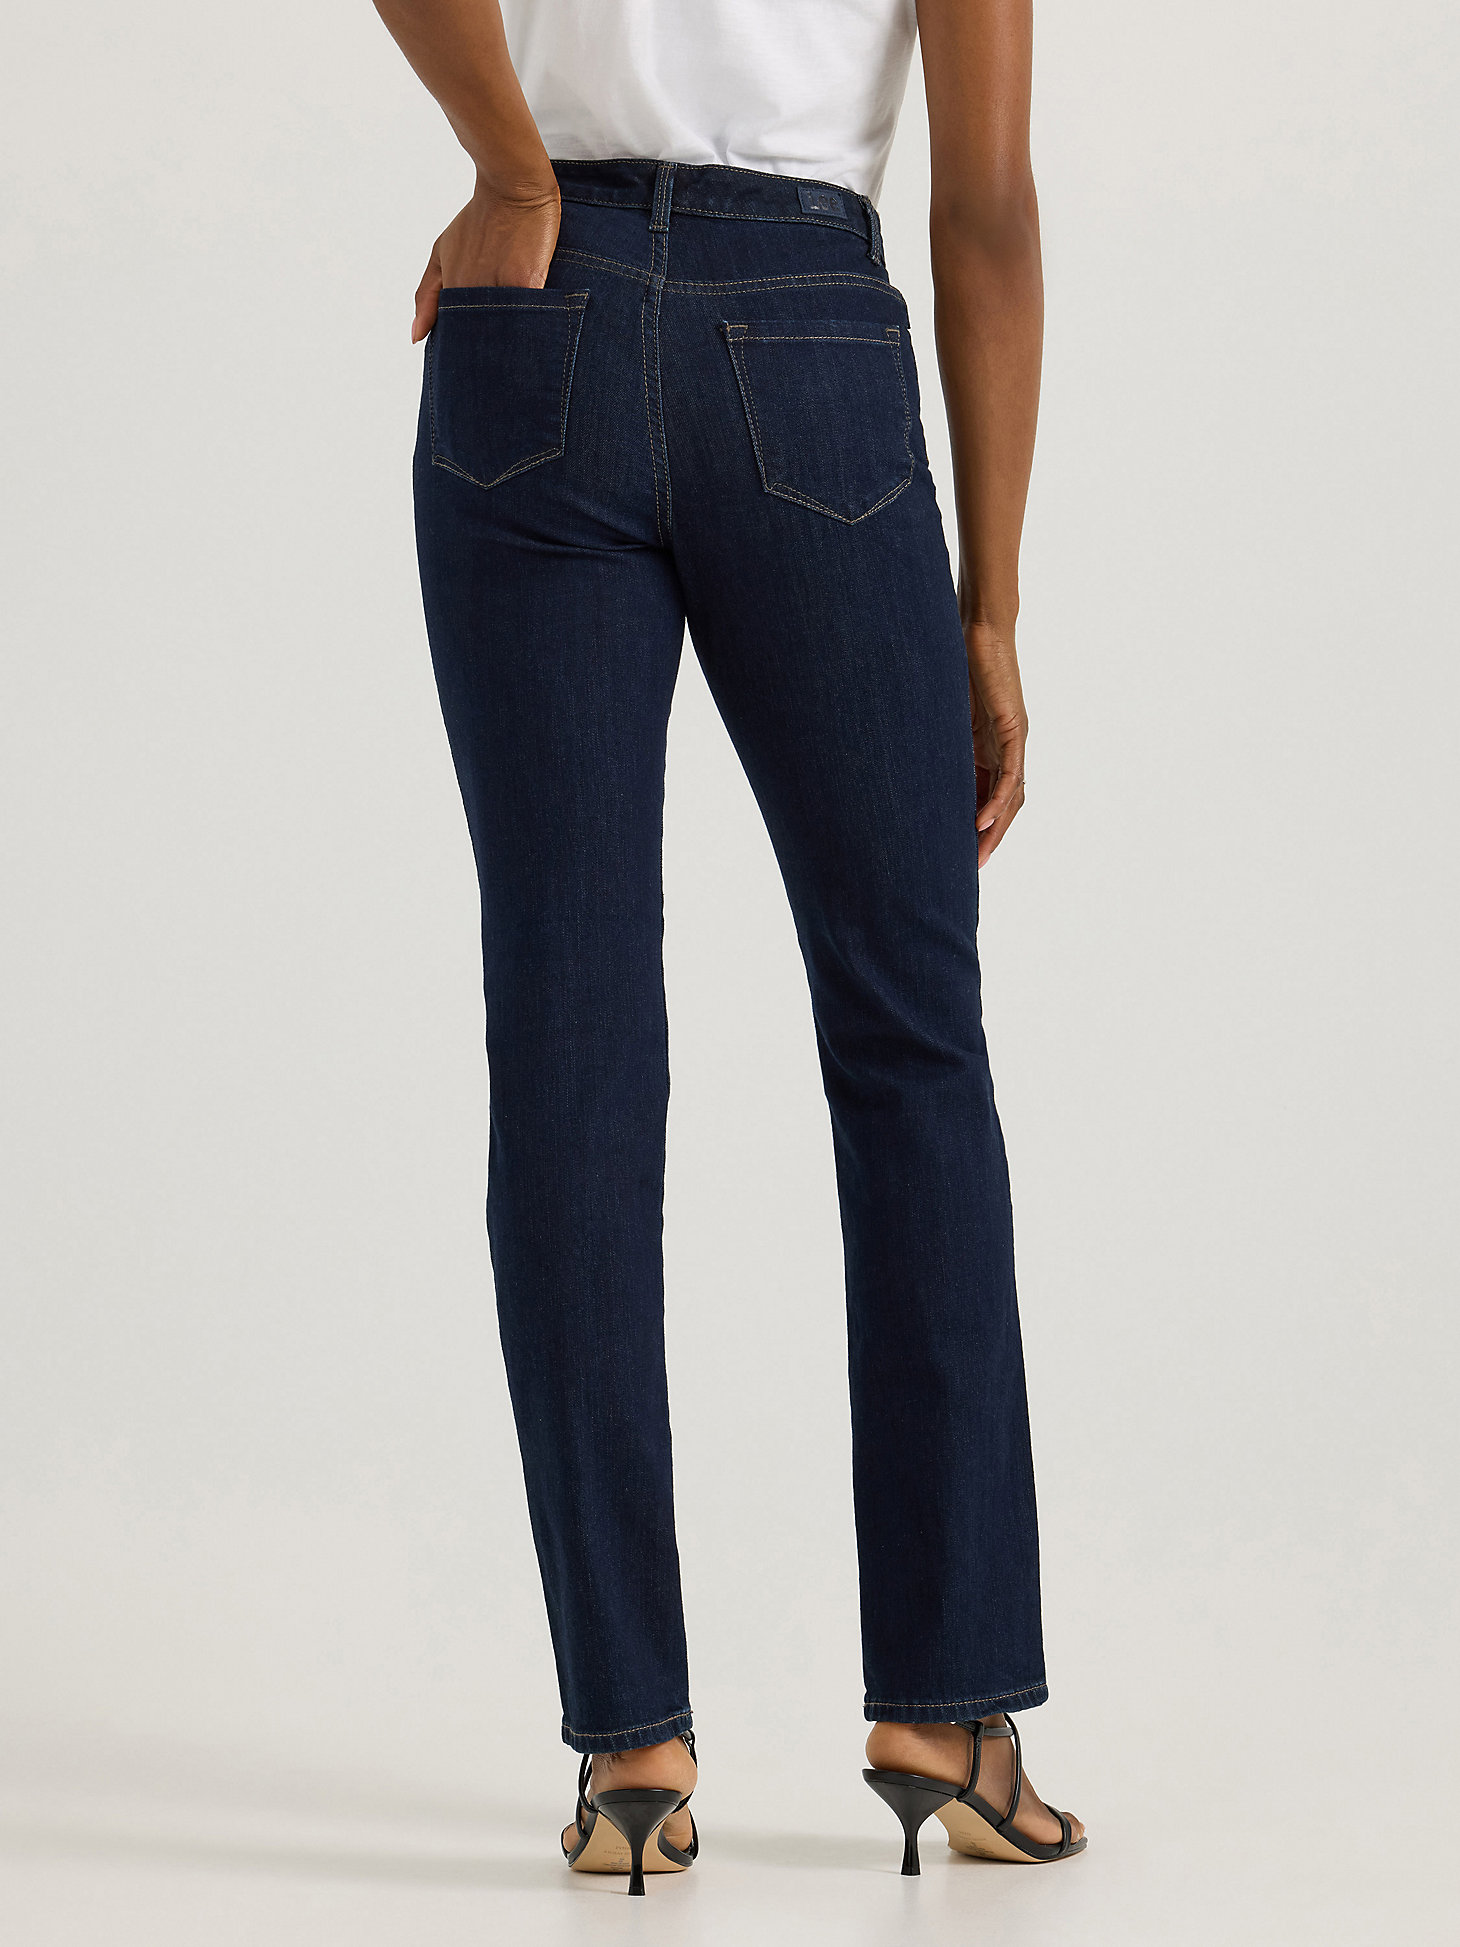 Women’s Instantly Slims Relaxed Fit Straight Leg Jean Classic Fit in Heritage alternative view 2